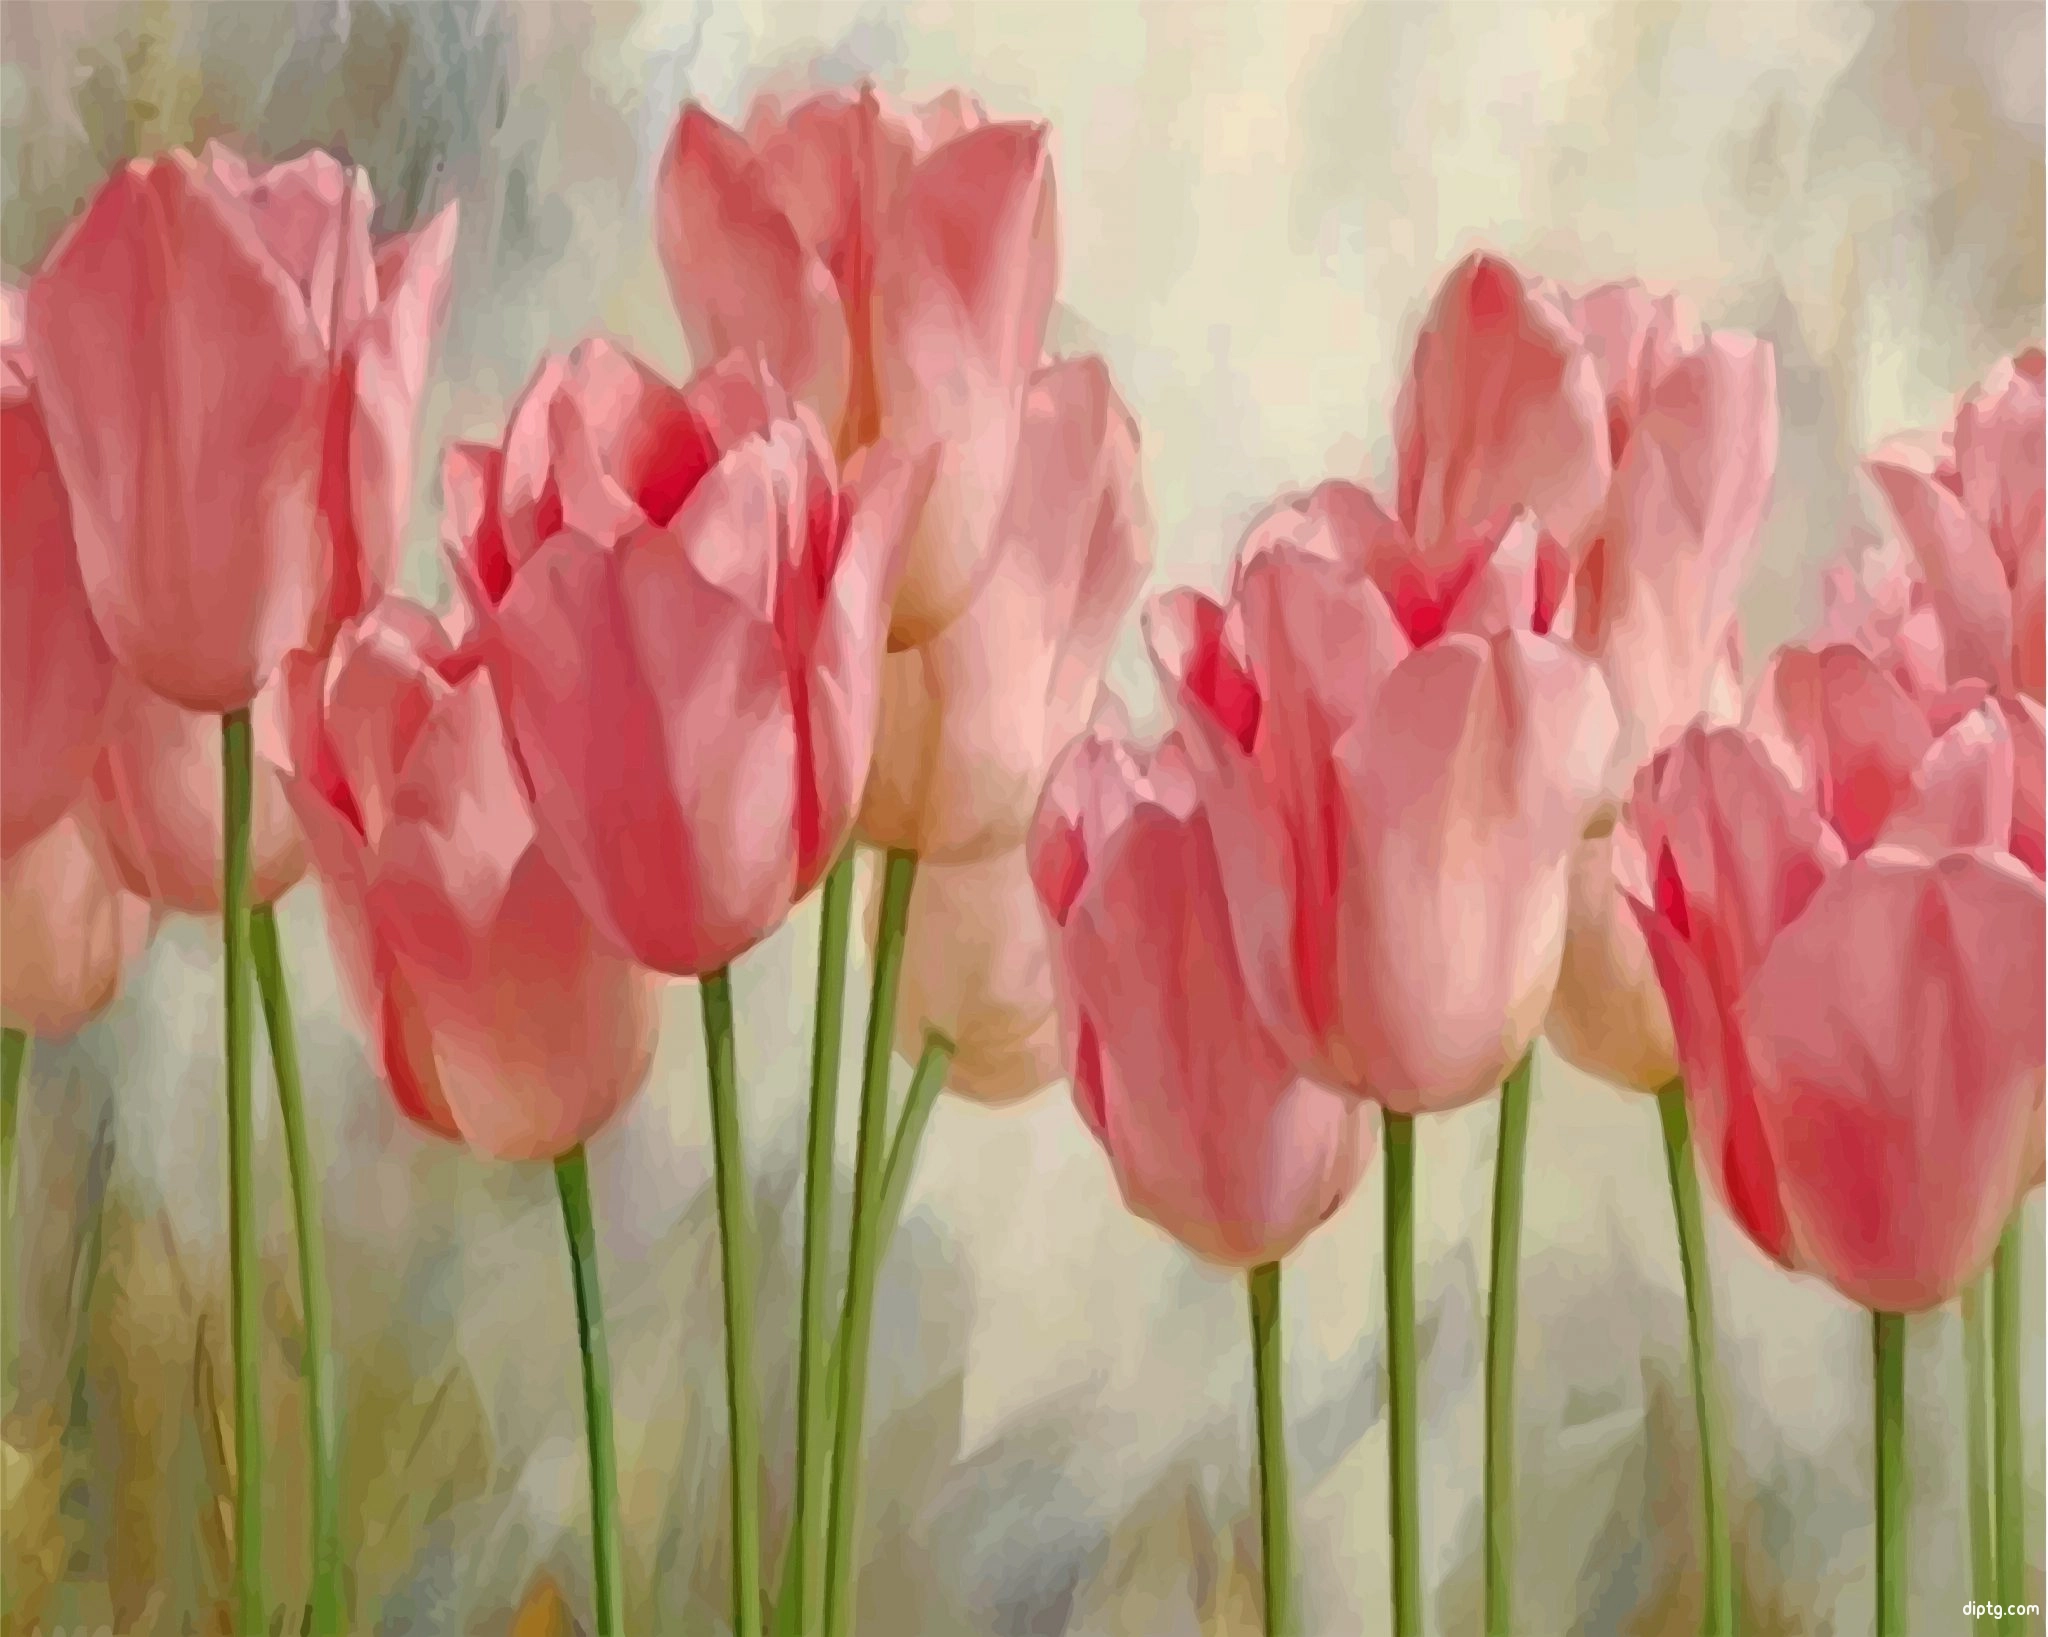 Pink Tulips Painting By Numbers Kits.jpg